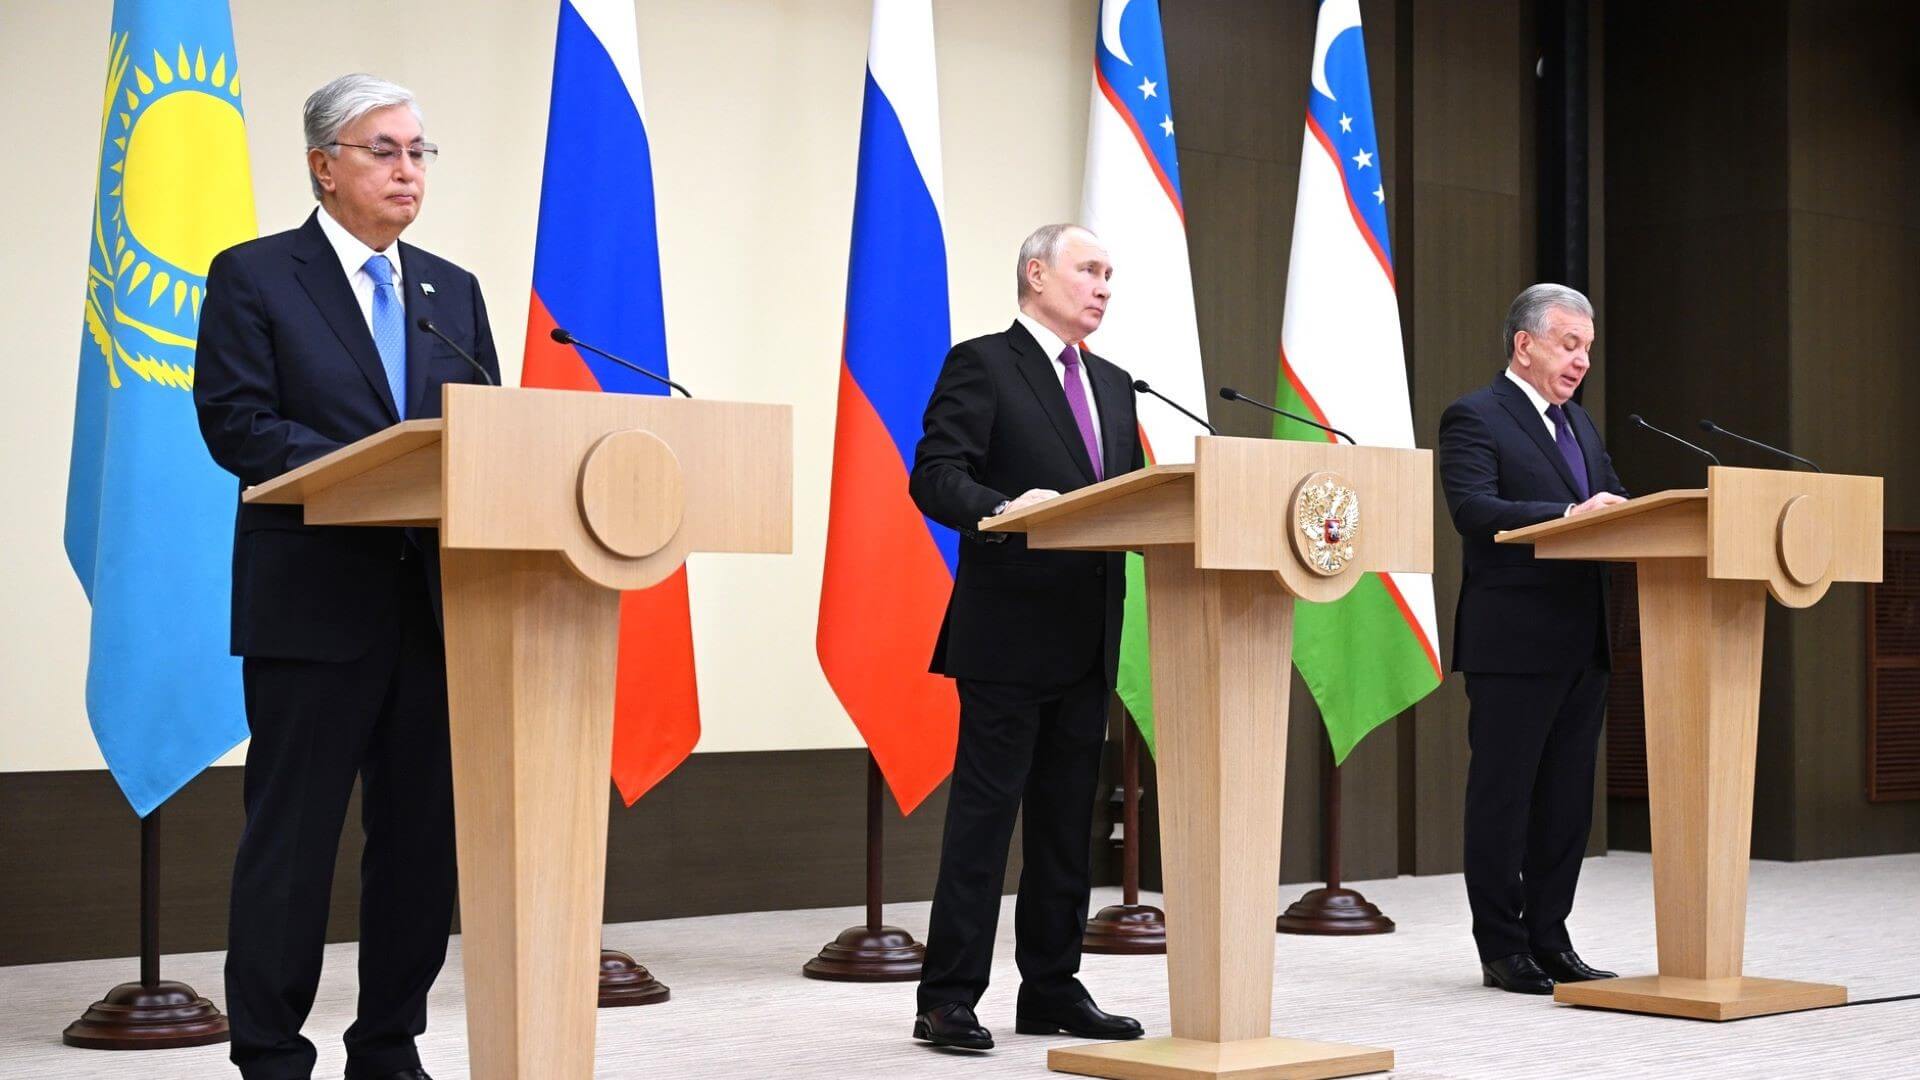 Kazakh, Russian and Uzbek Presidents standing behind lecturns on stage at a press conference, with national flags behind them